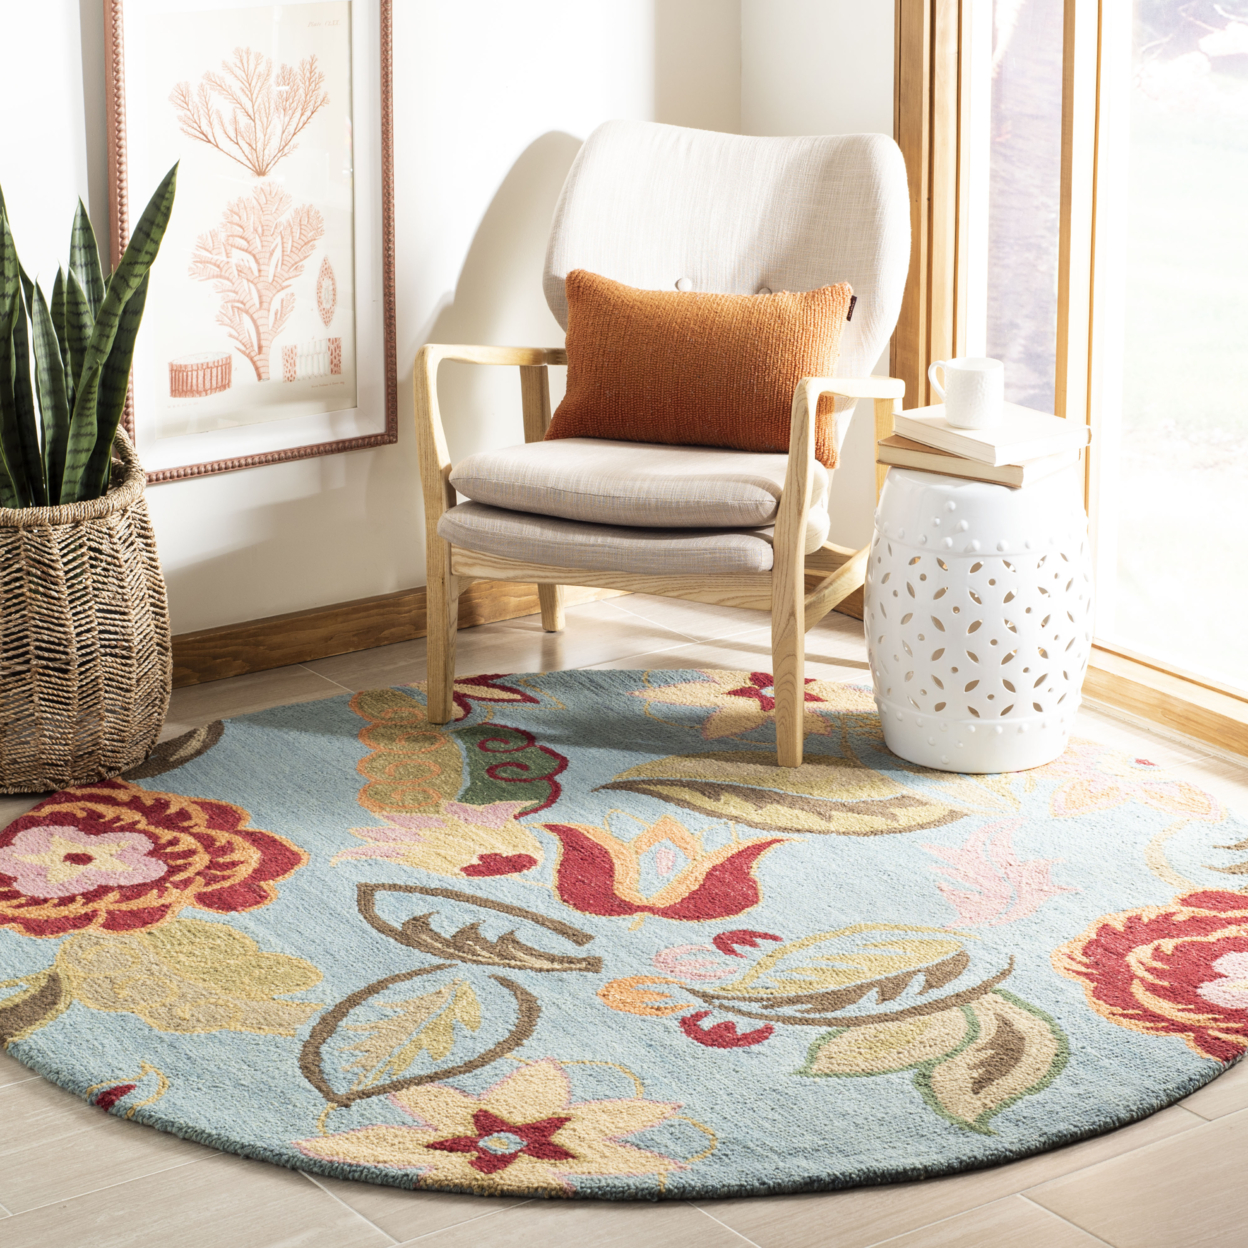 SAFAVIEH Blossom BLM675A Hand-hooked Blue / Multi Rug - 6' Round